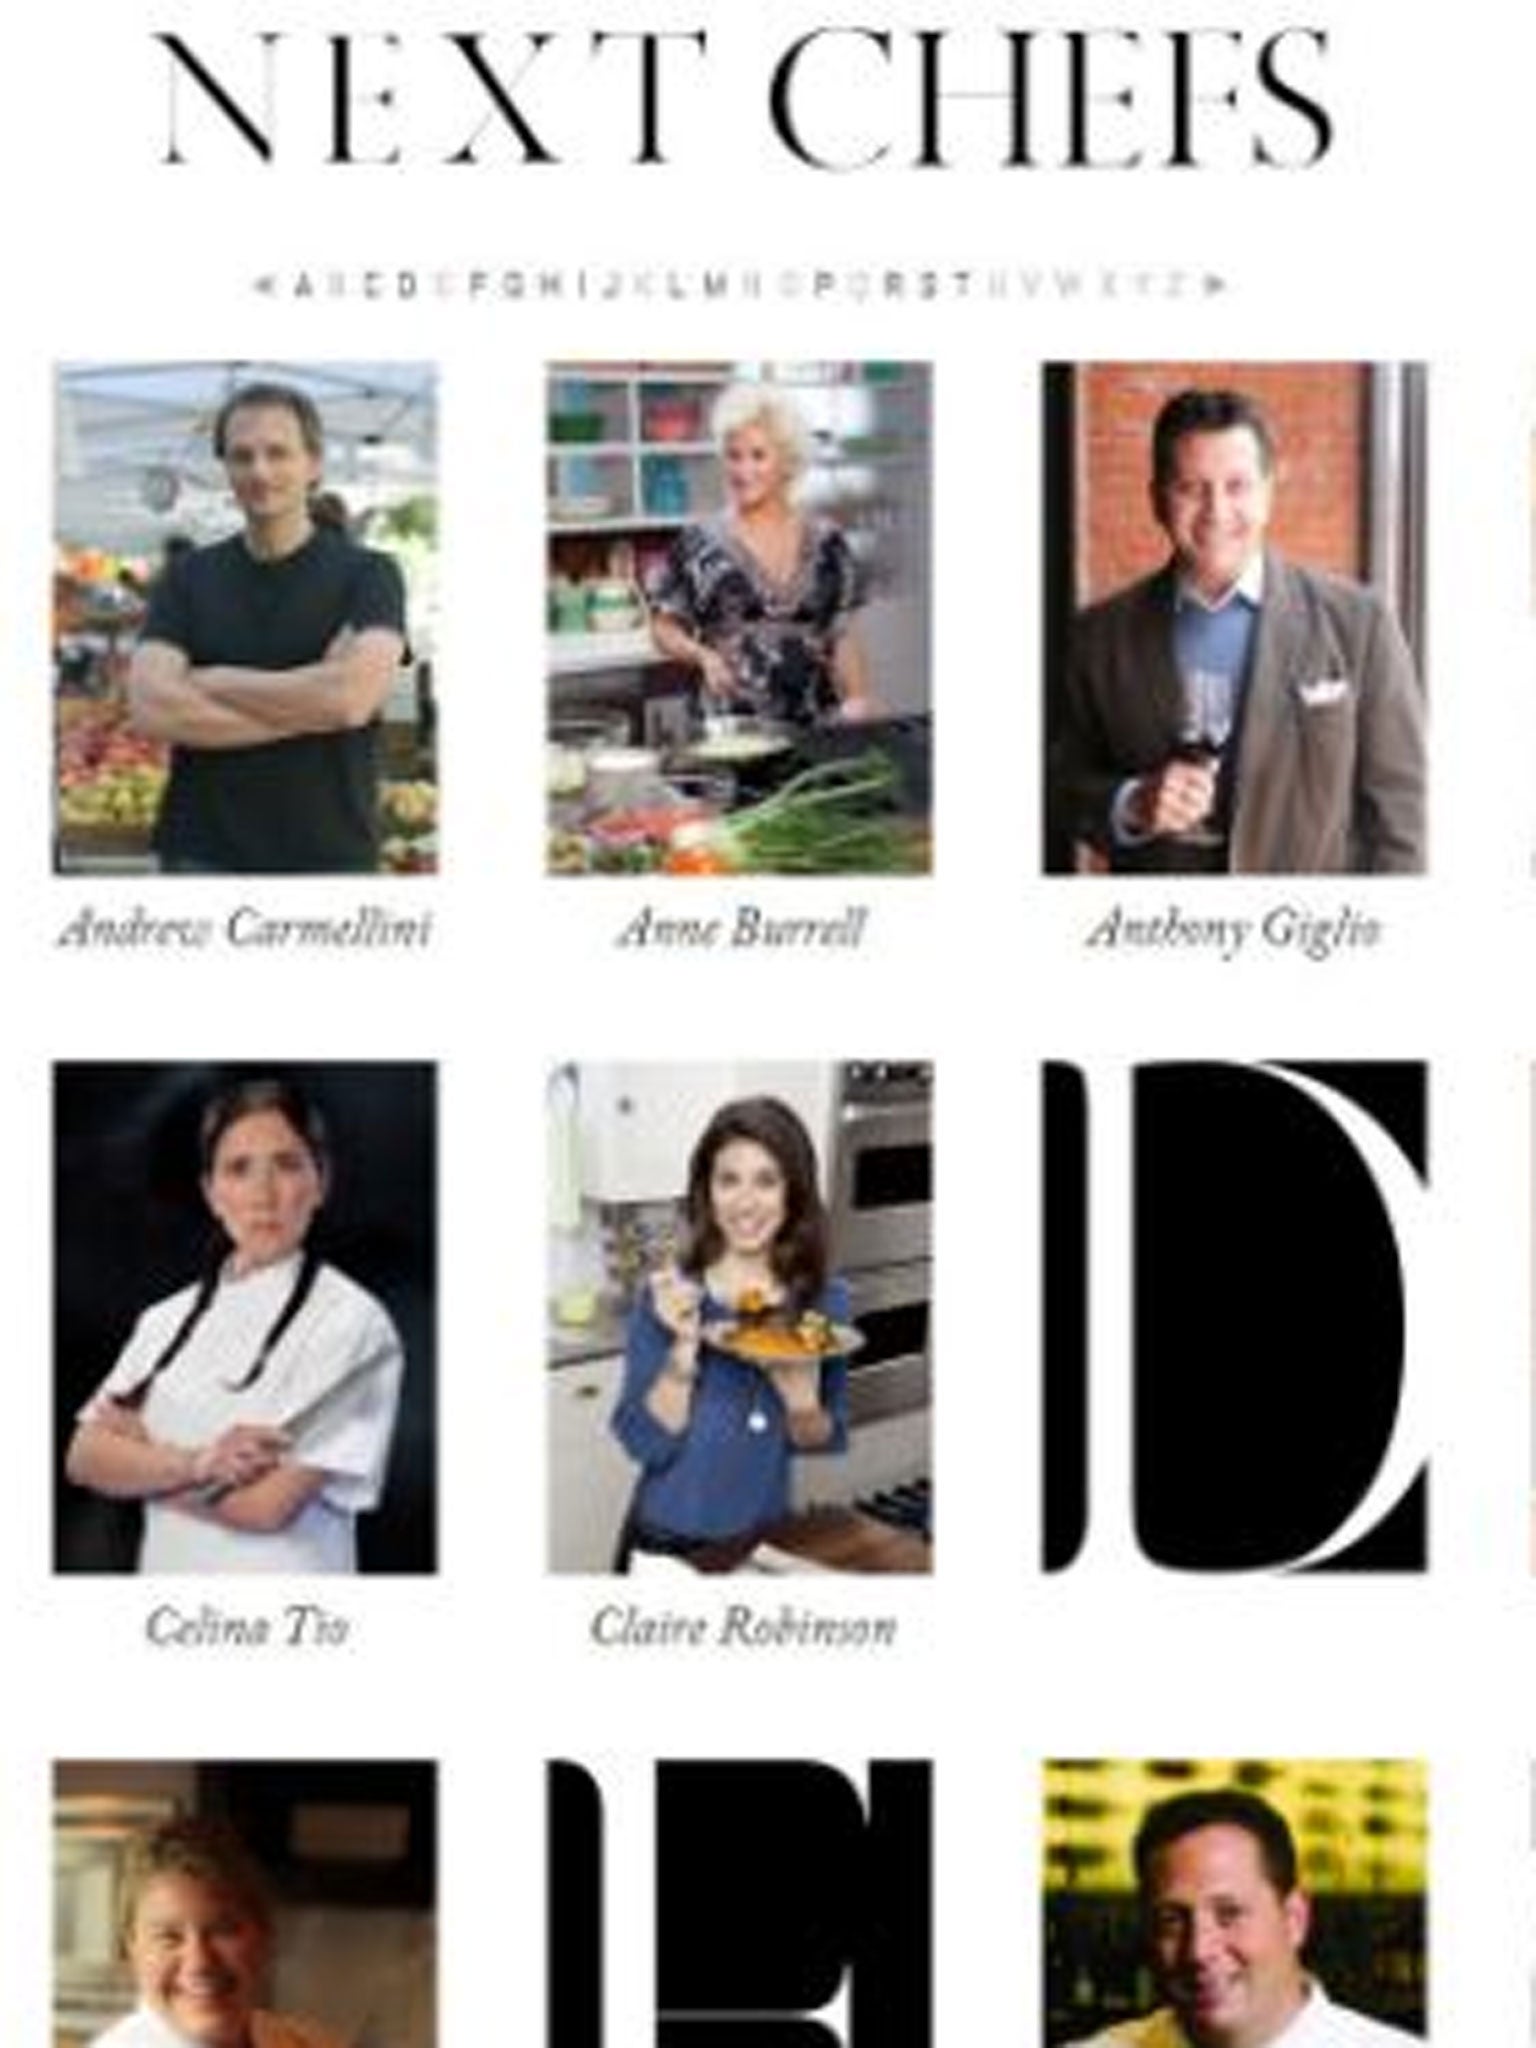 Next Models agency has included a chef's division